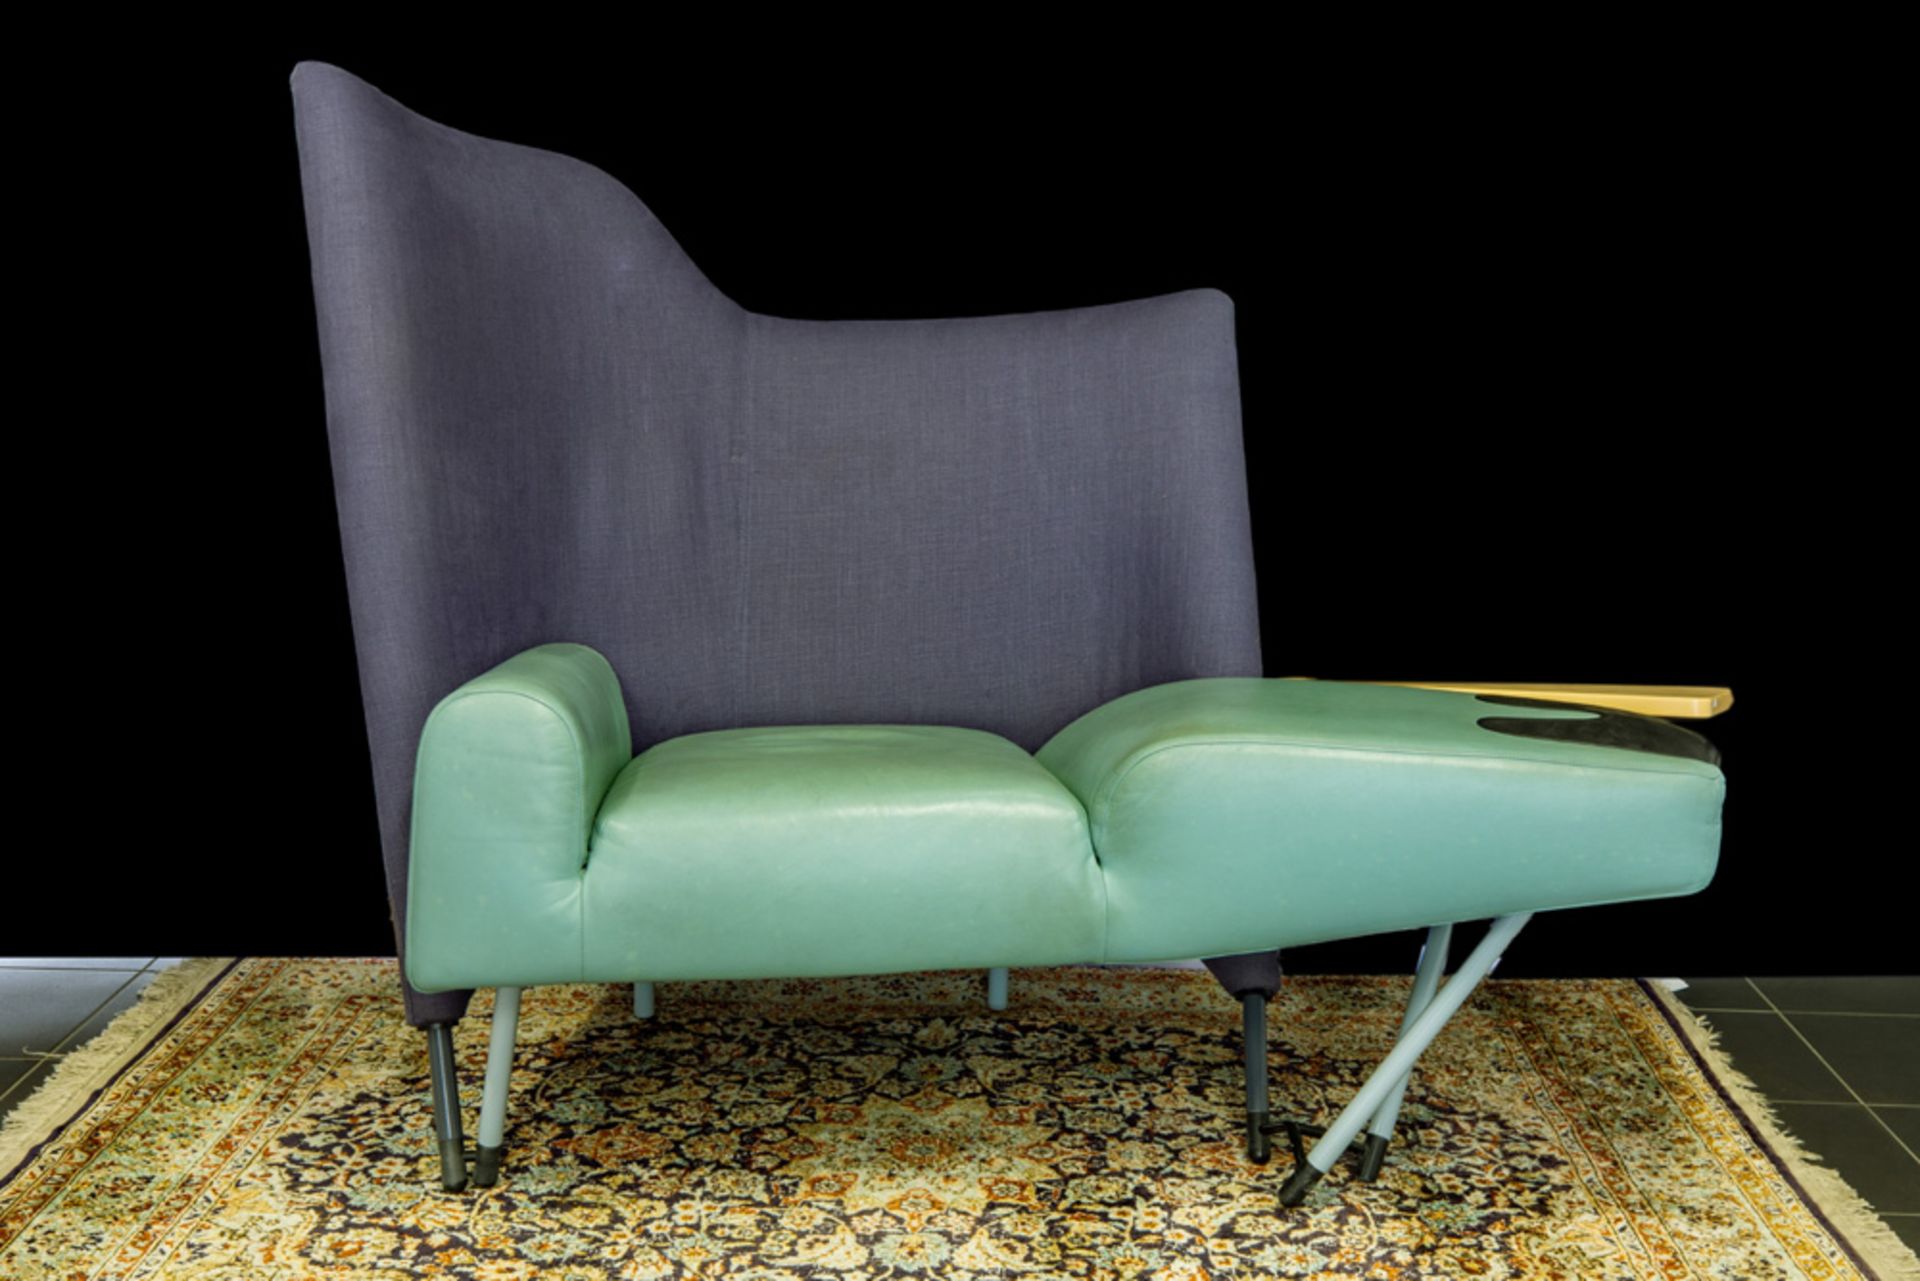 eighties' Paolo Deganello "Torso 654" design armchair, made by Cassina - marked || DEGANELLO